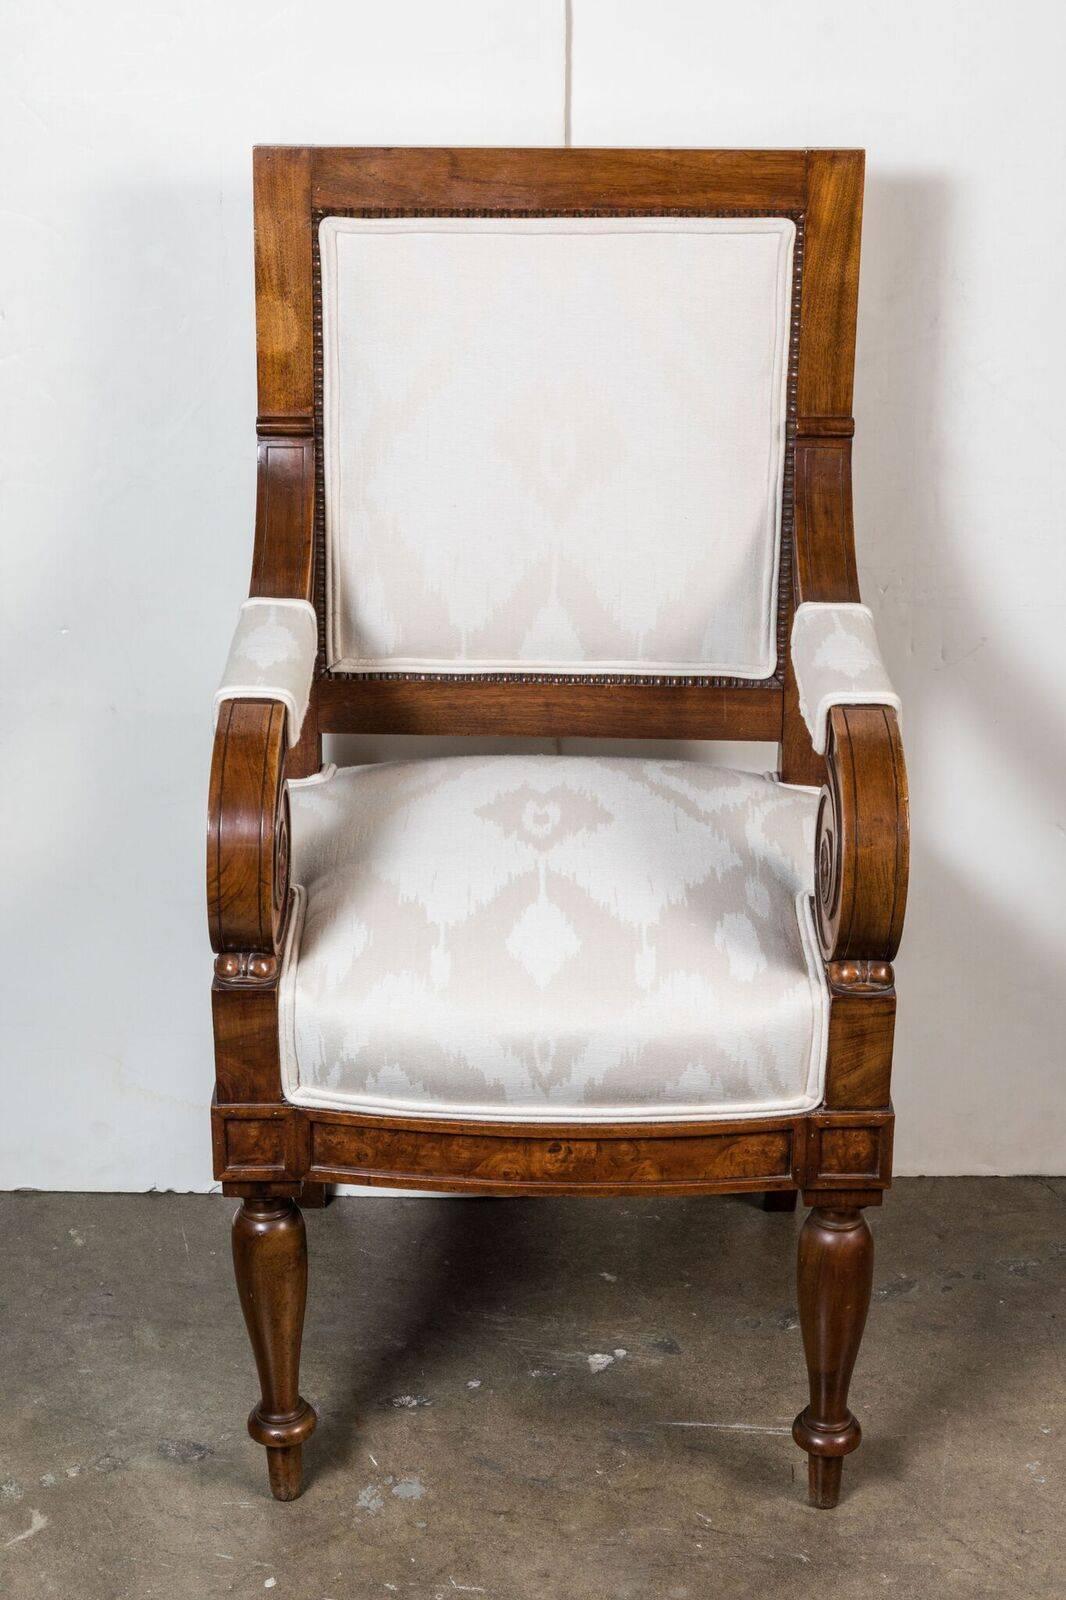 Pair of Liberty Period, beautifully carved, solid Chestnut side chairs with unique, tightly scrolled arms featuring radiant, floral reliefs in the center of each.